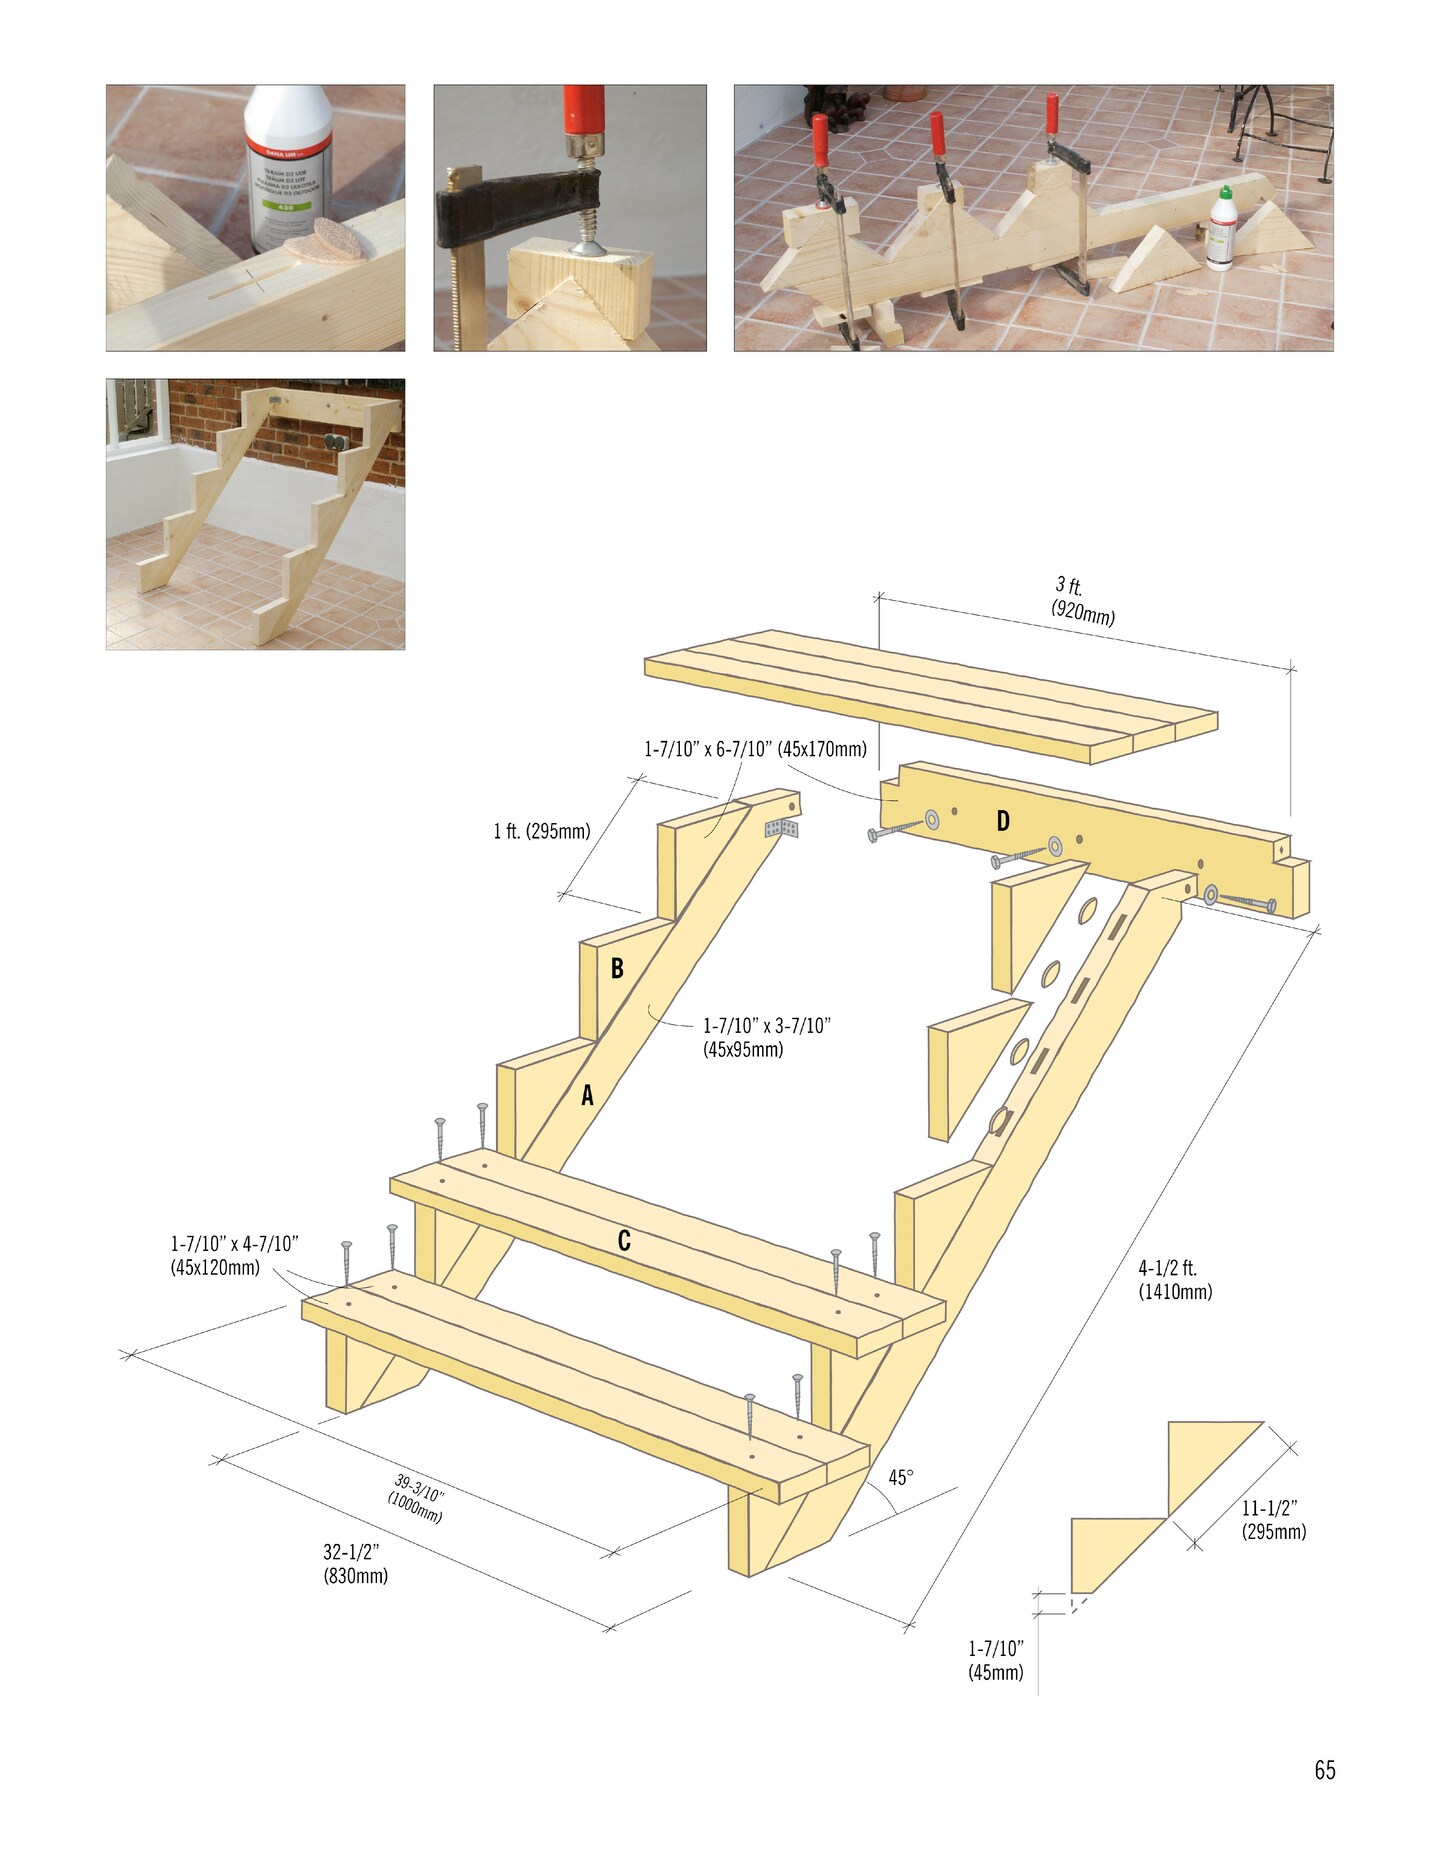 Basic Carpentry and Interior Design Projects for the Home and Garden